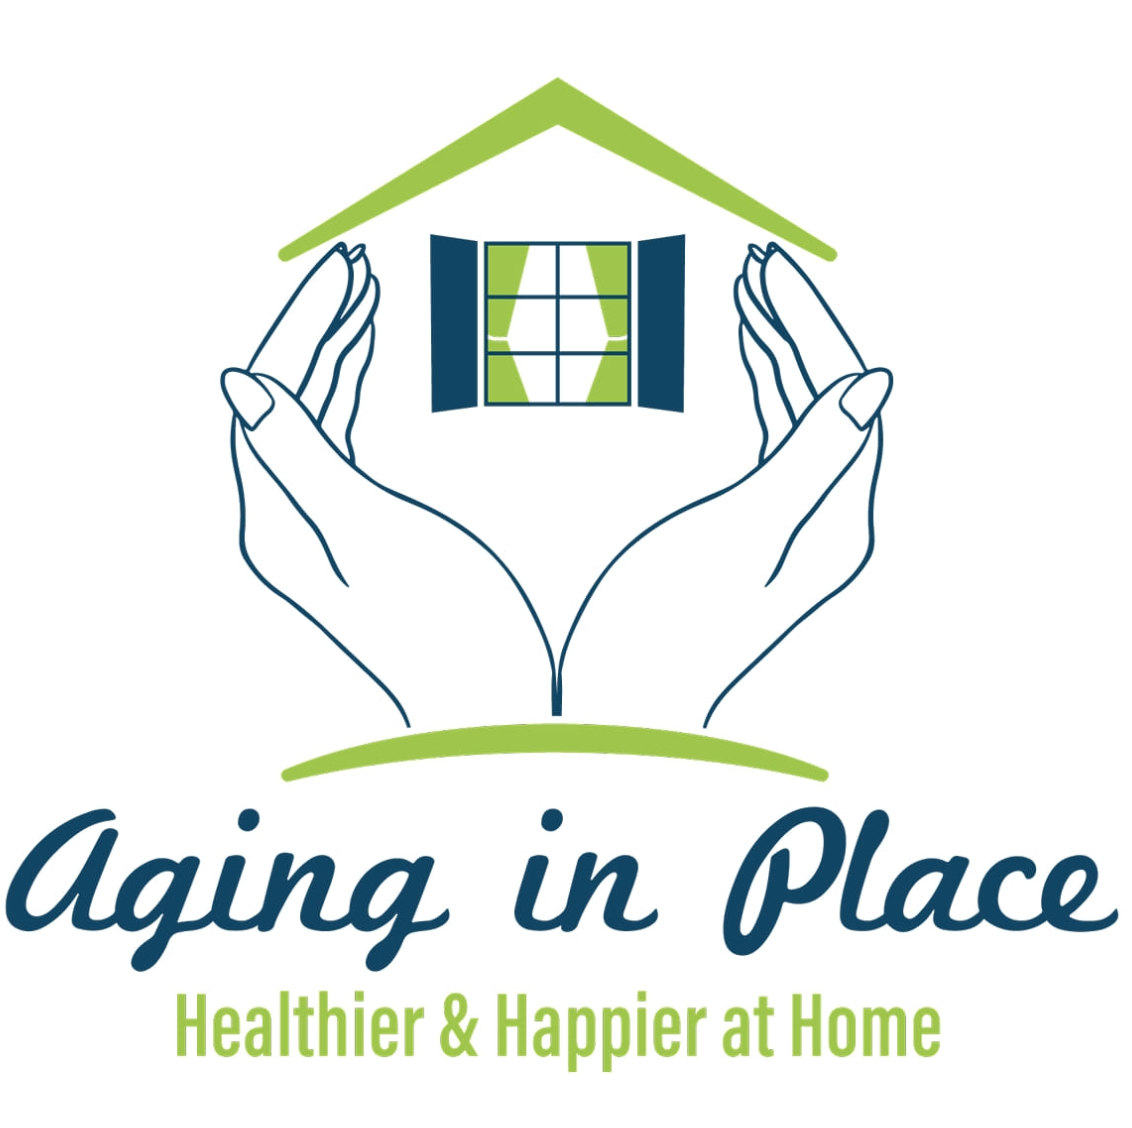 Careers at Aging in Place